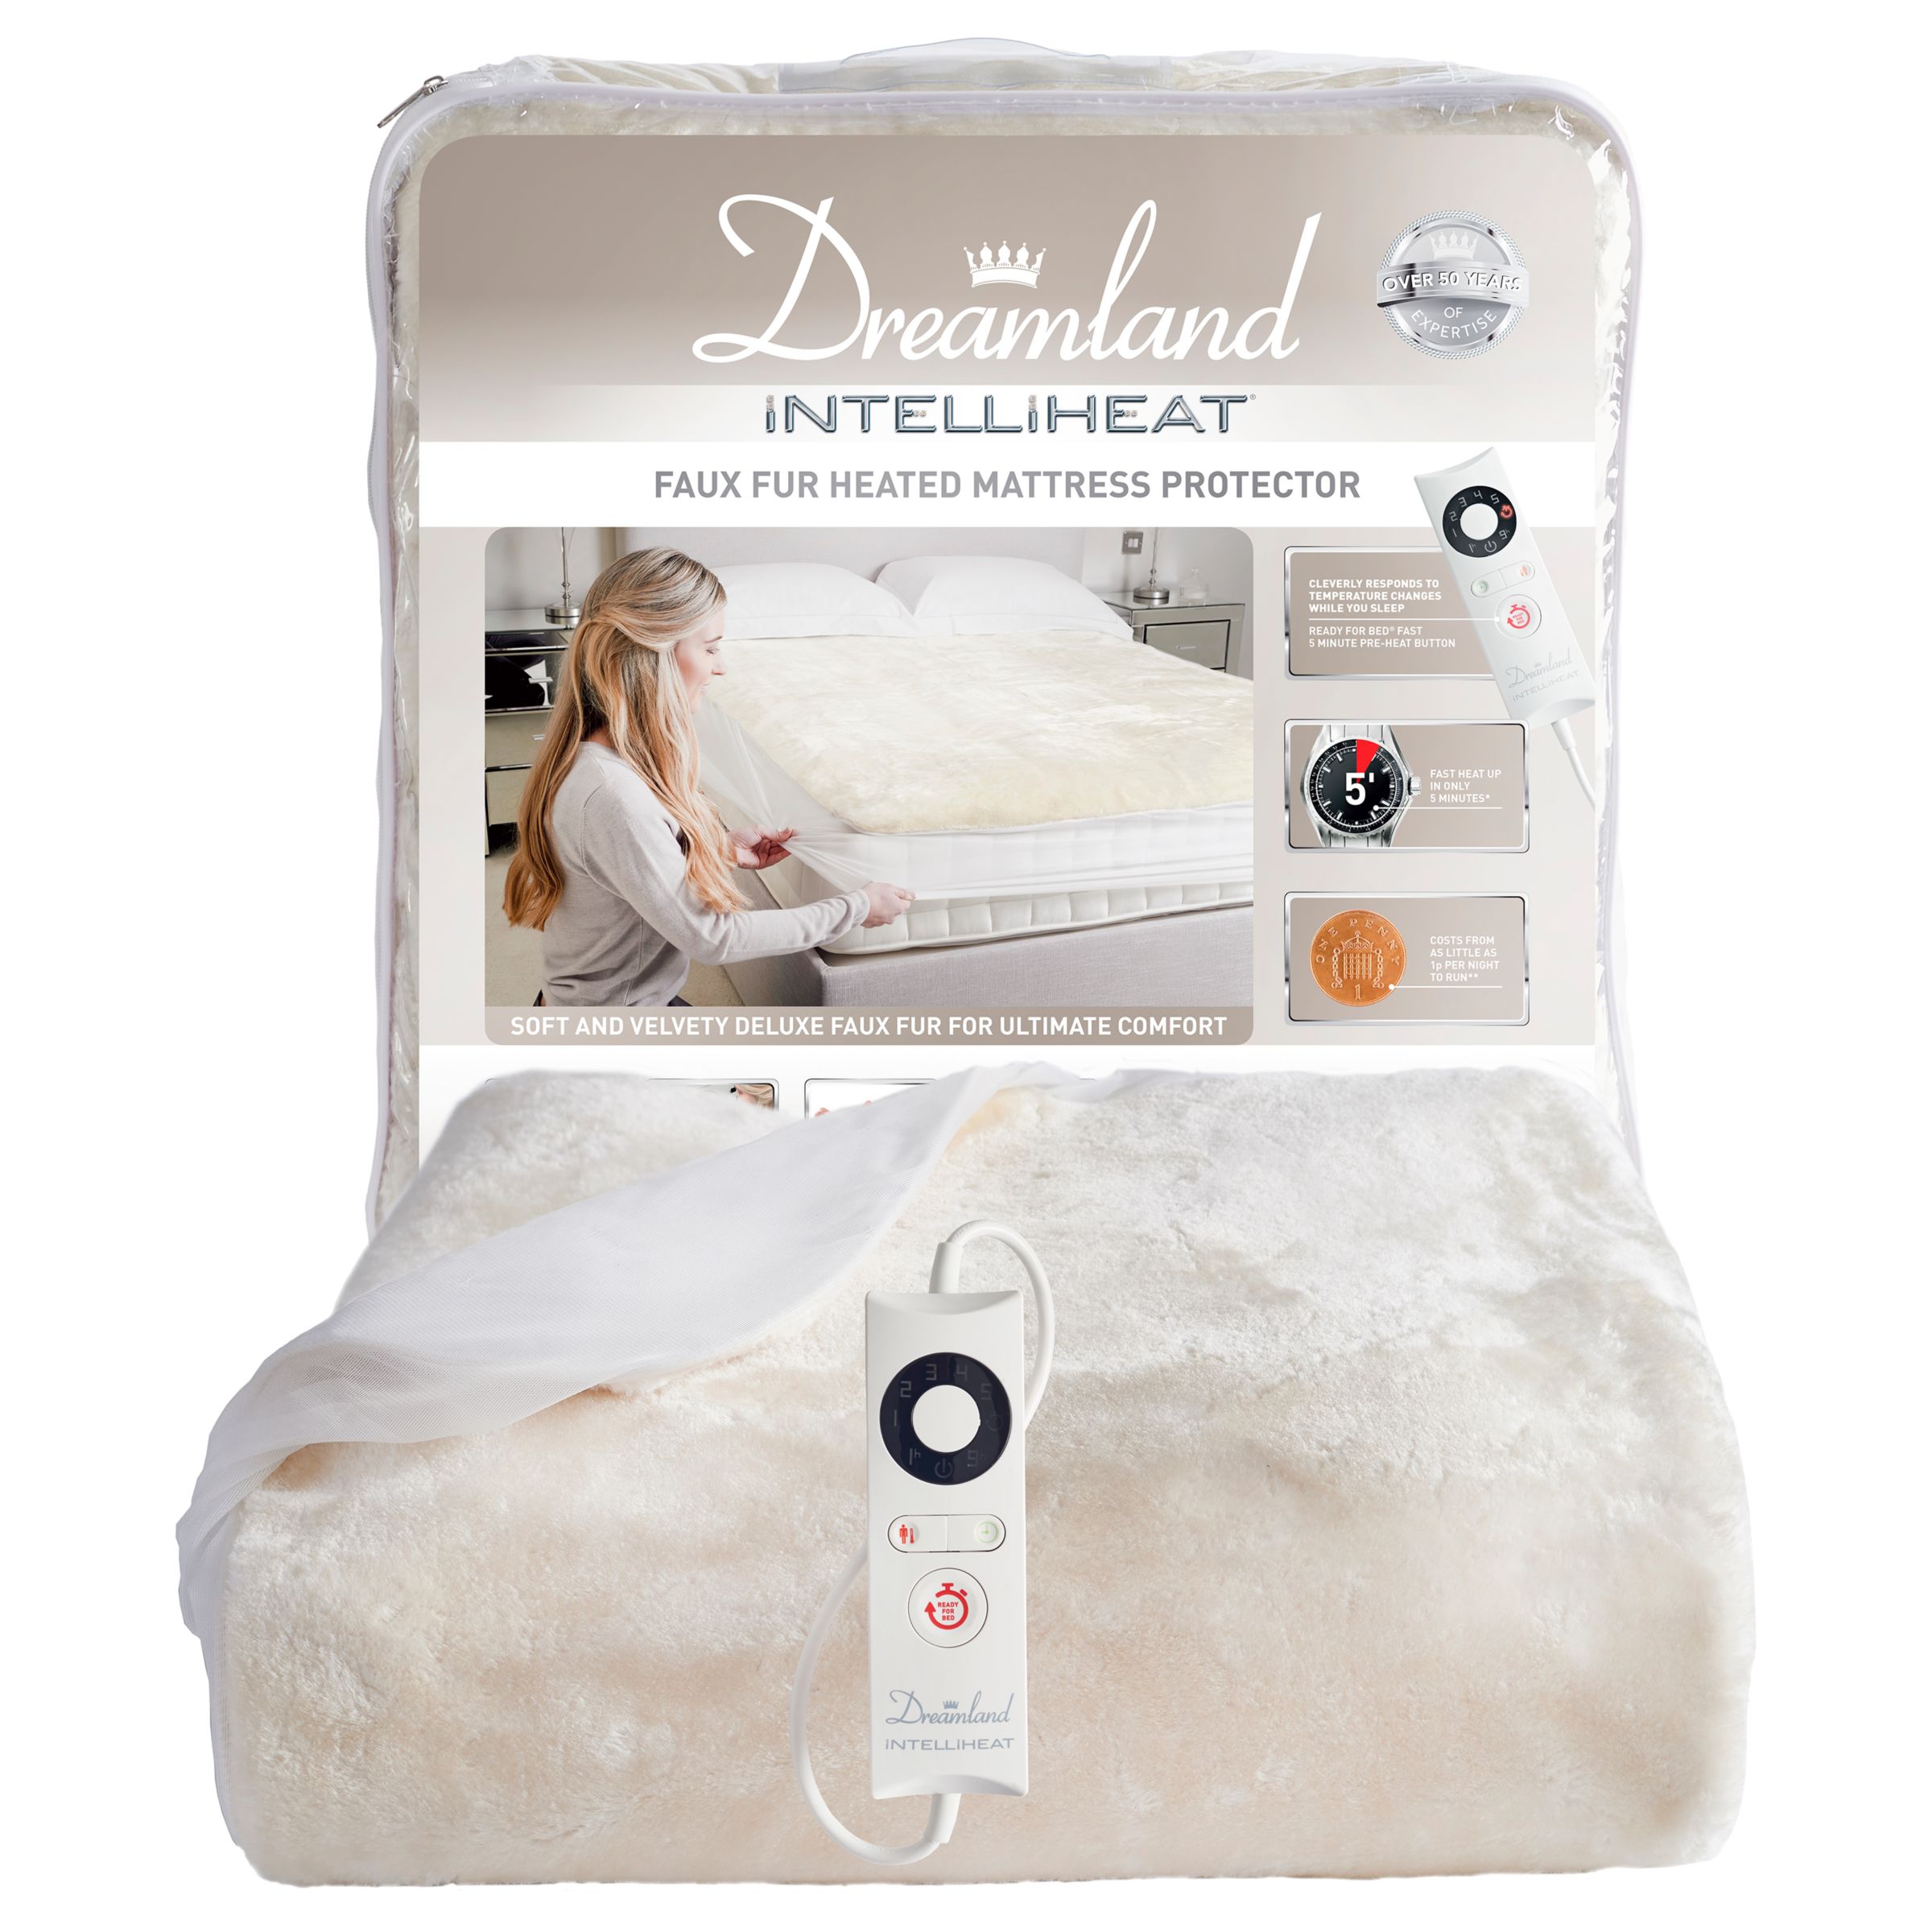 Buy Dreamland Intelliheat Faux Fur Heated Mattress Protector from our Elect...